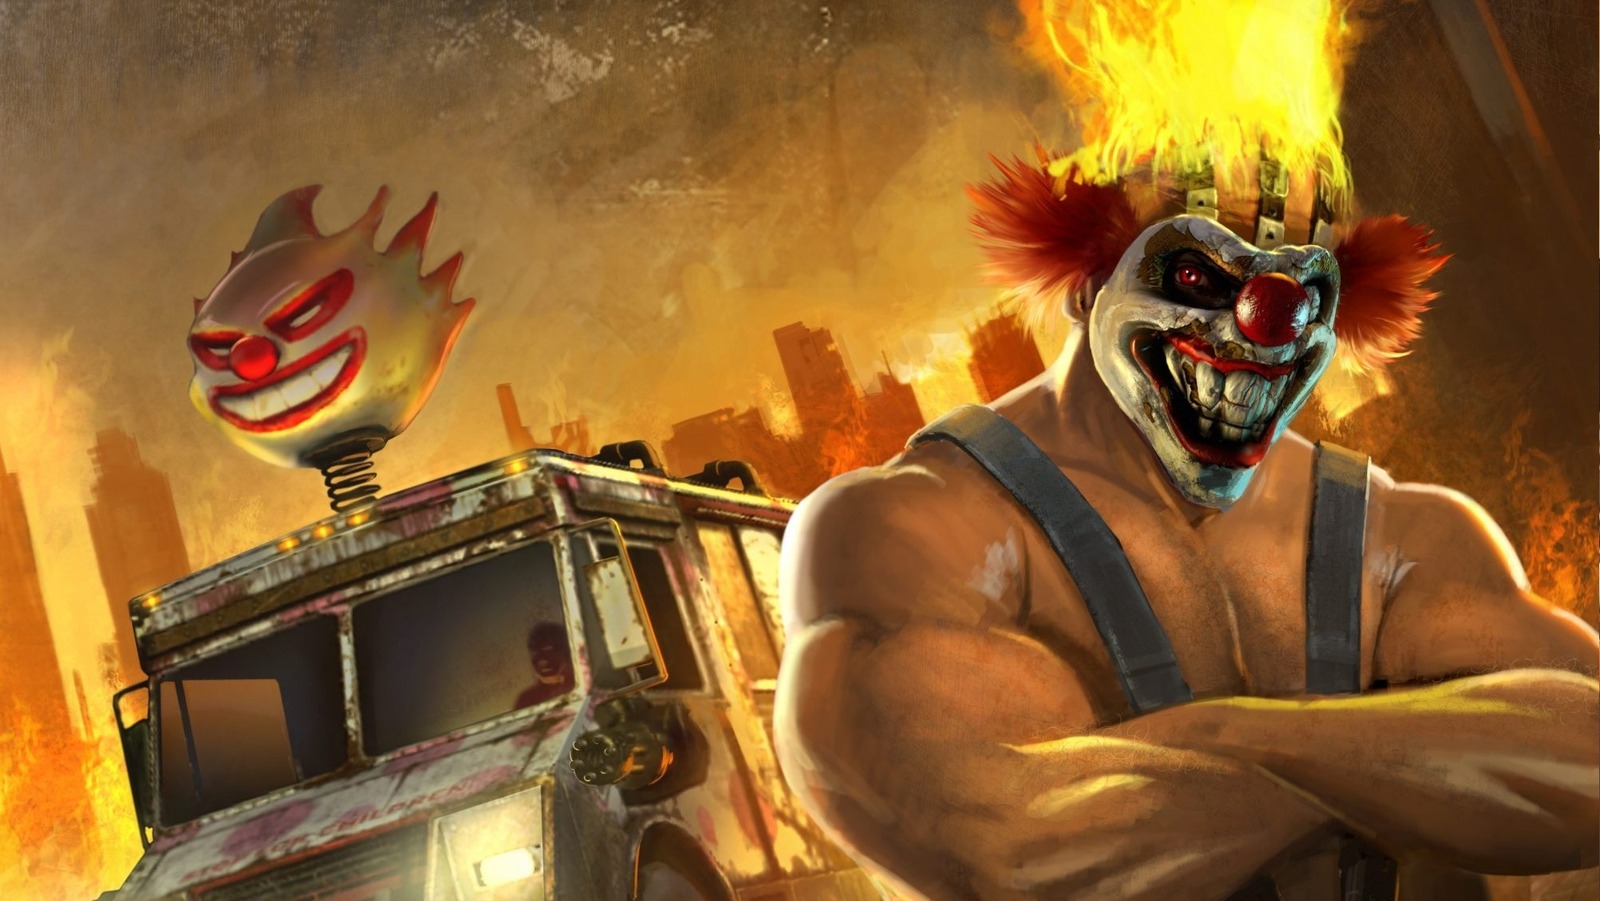 Twisted Metal - Game Overview